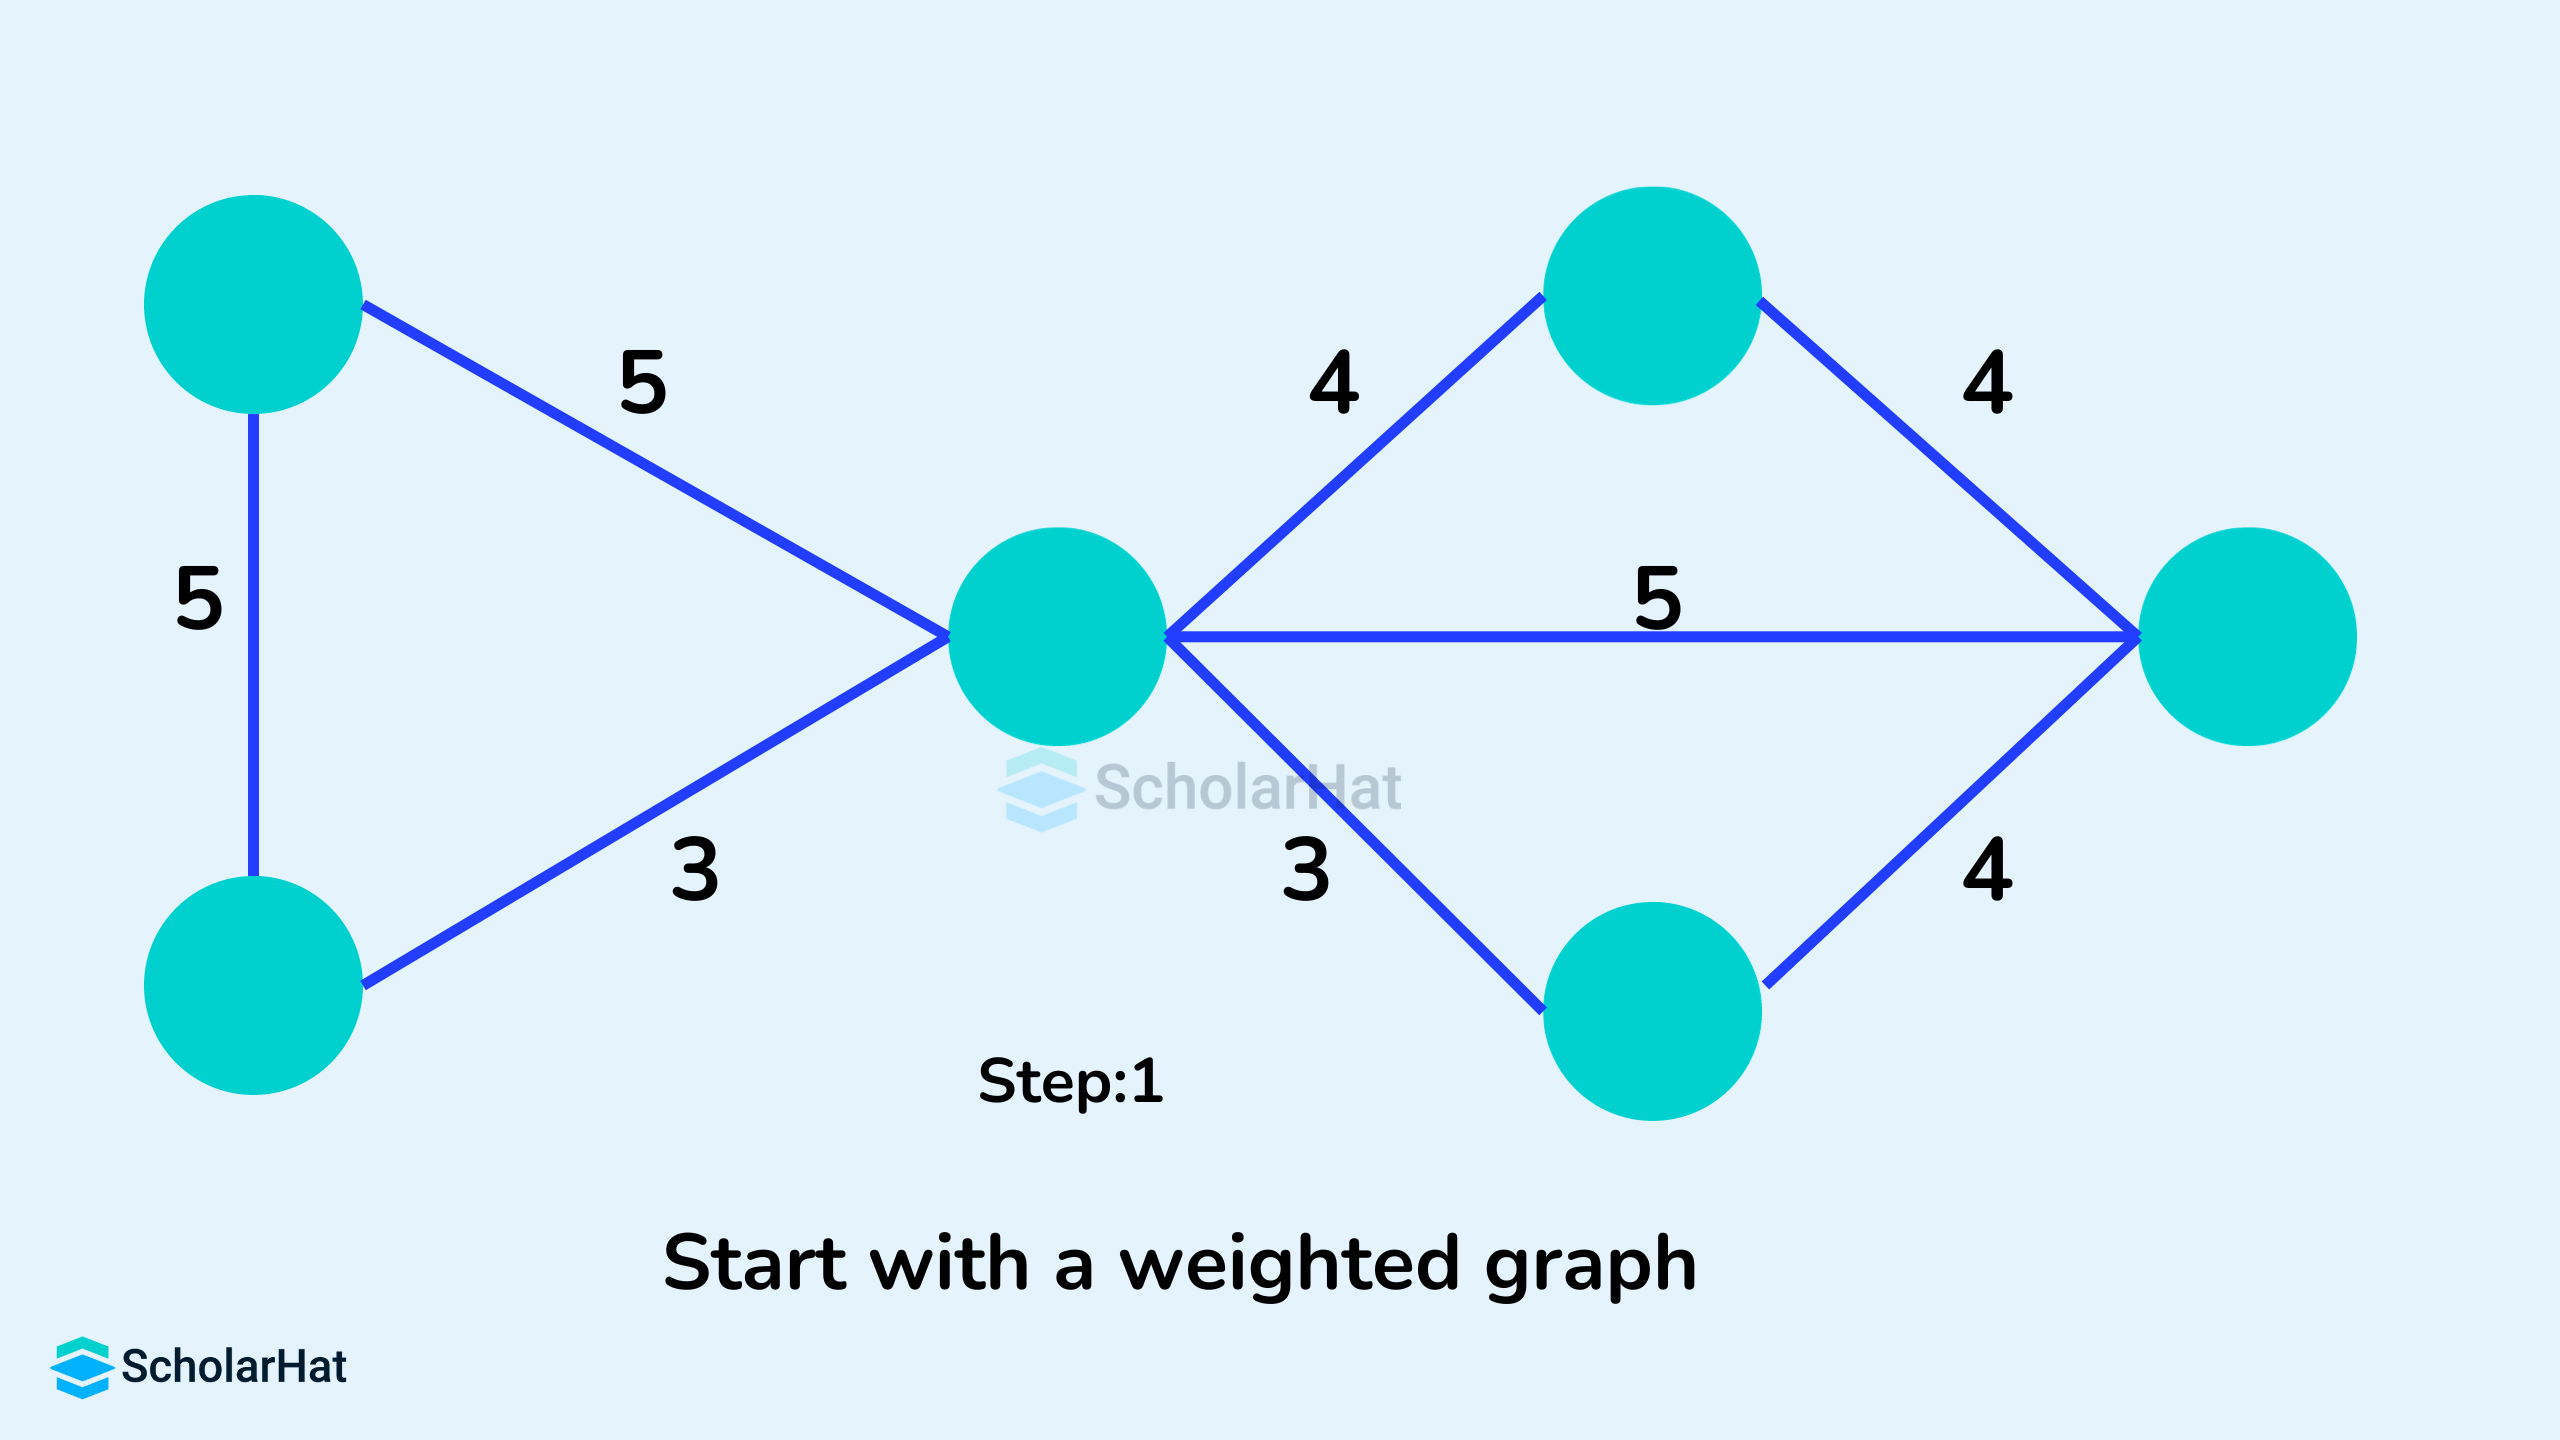 Start with a weighted graph